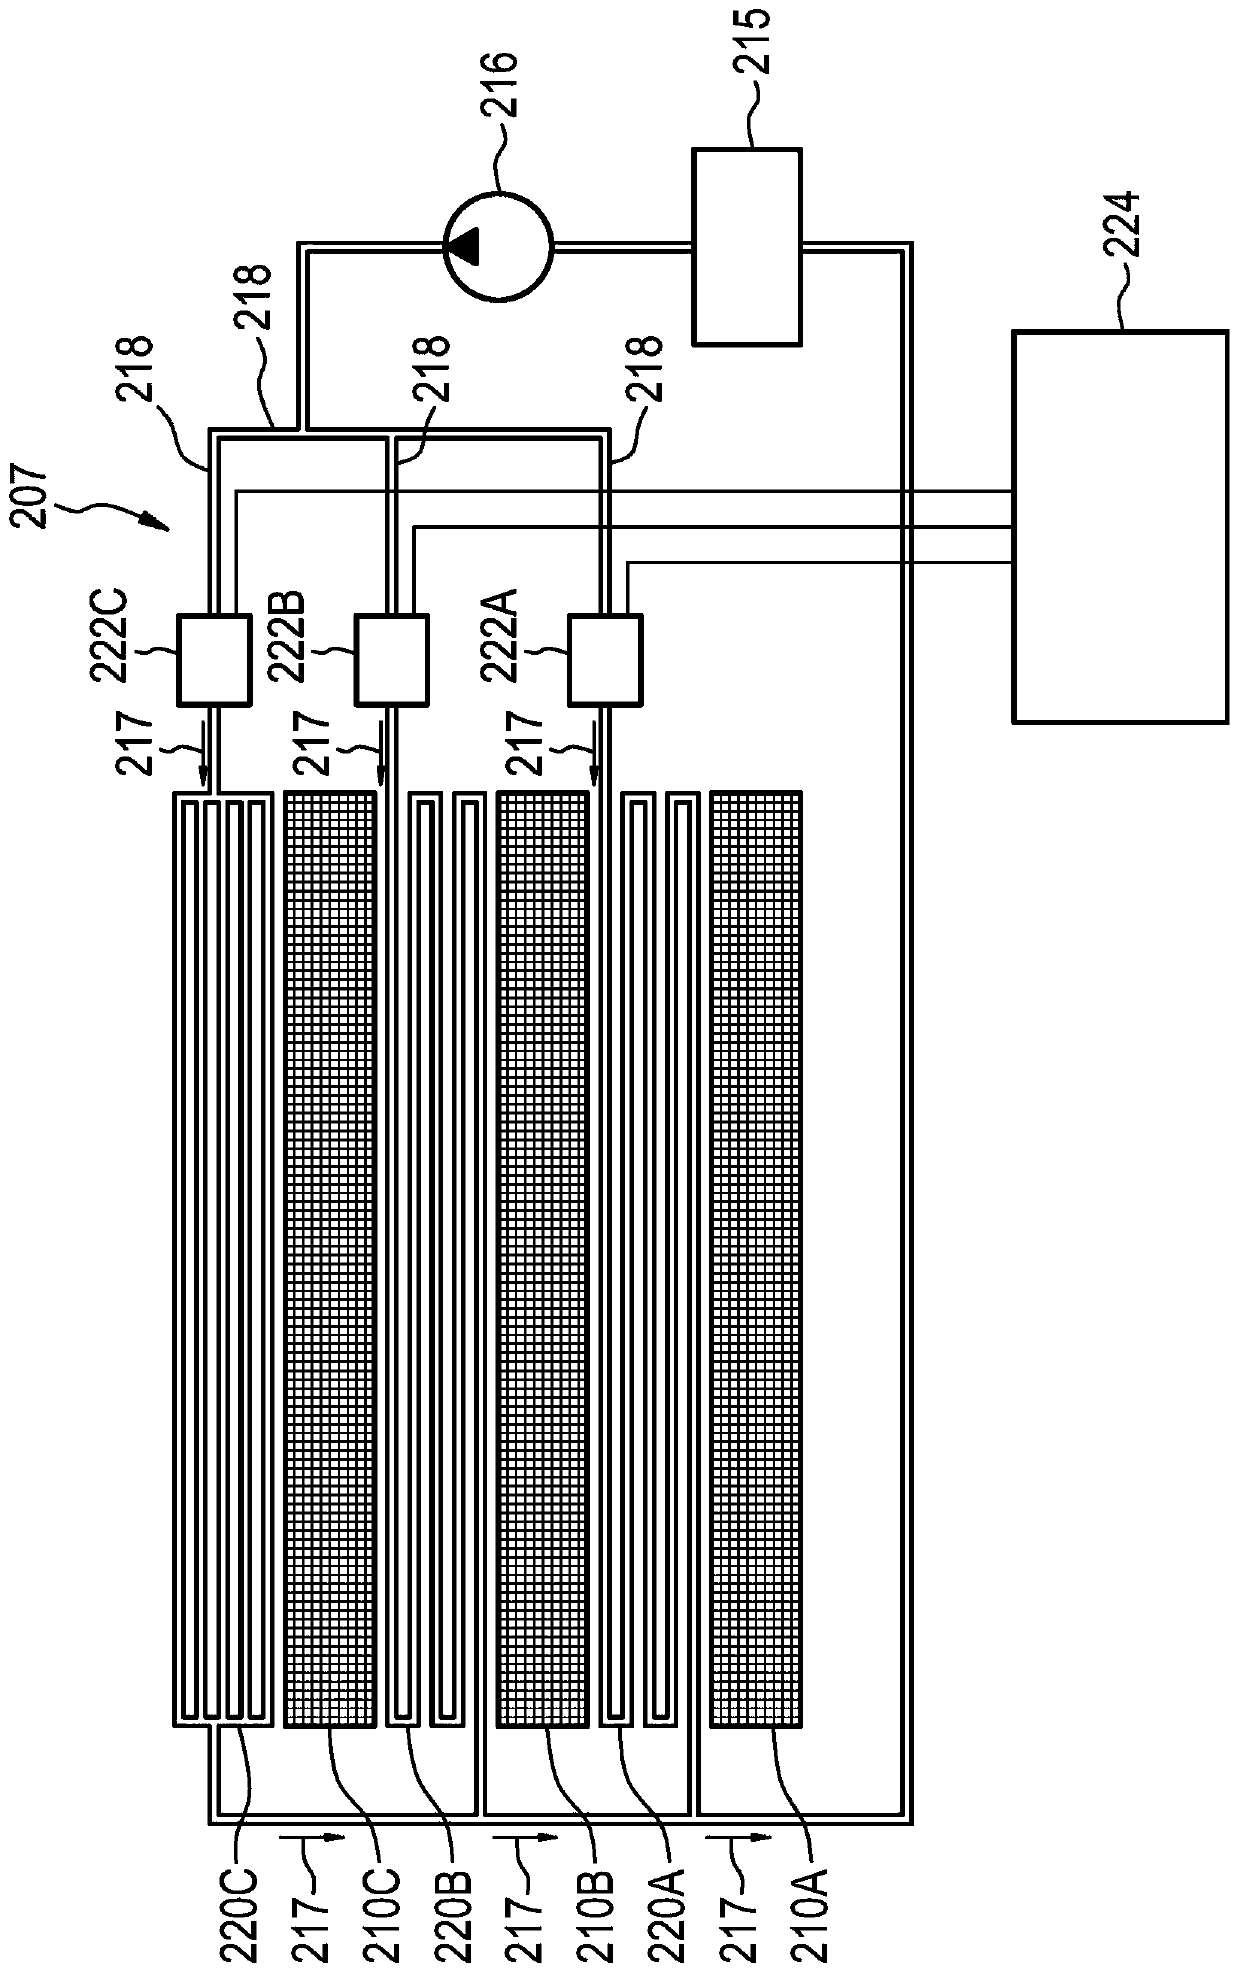 Gradient system with controlled cooling in the individual gradient channels